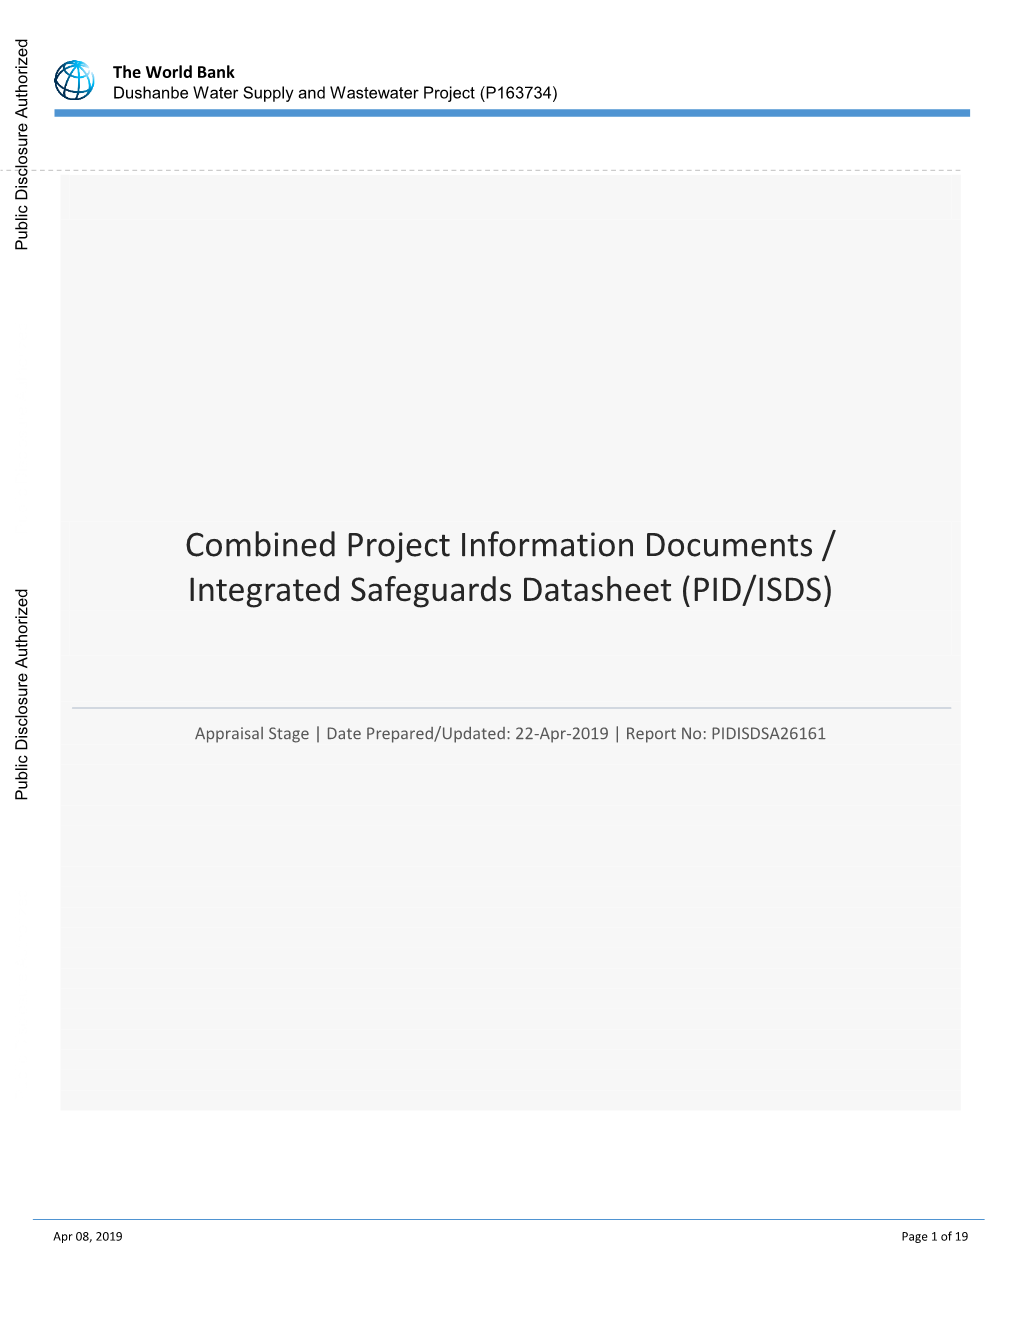 Project-Information-Document-Integrated-Safeguards-Data-Sheet-Dushanbe-Water-Supply